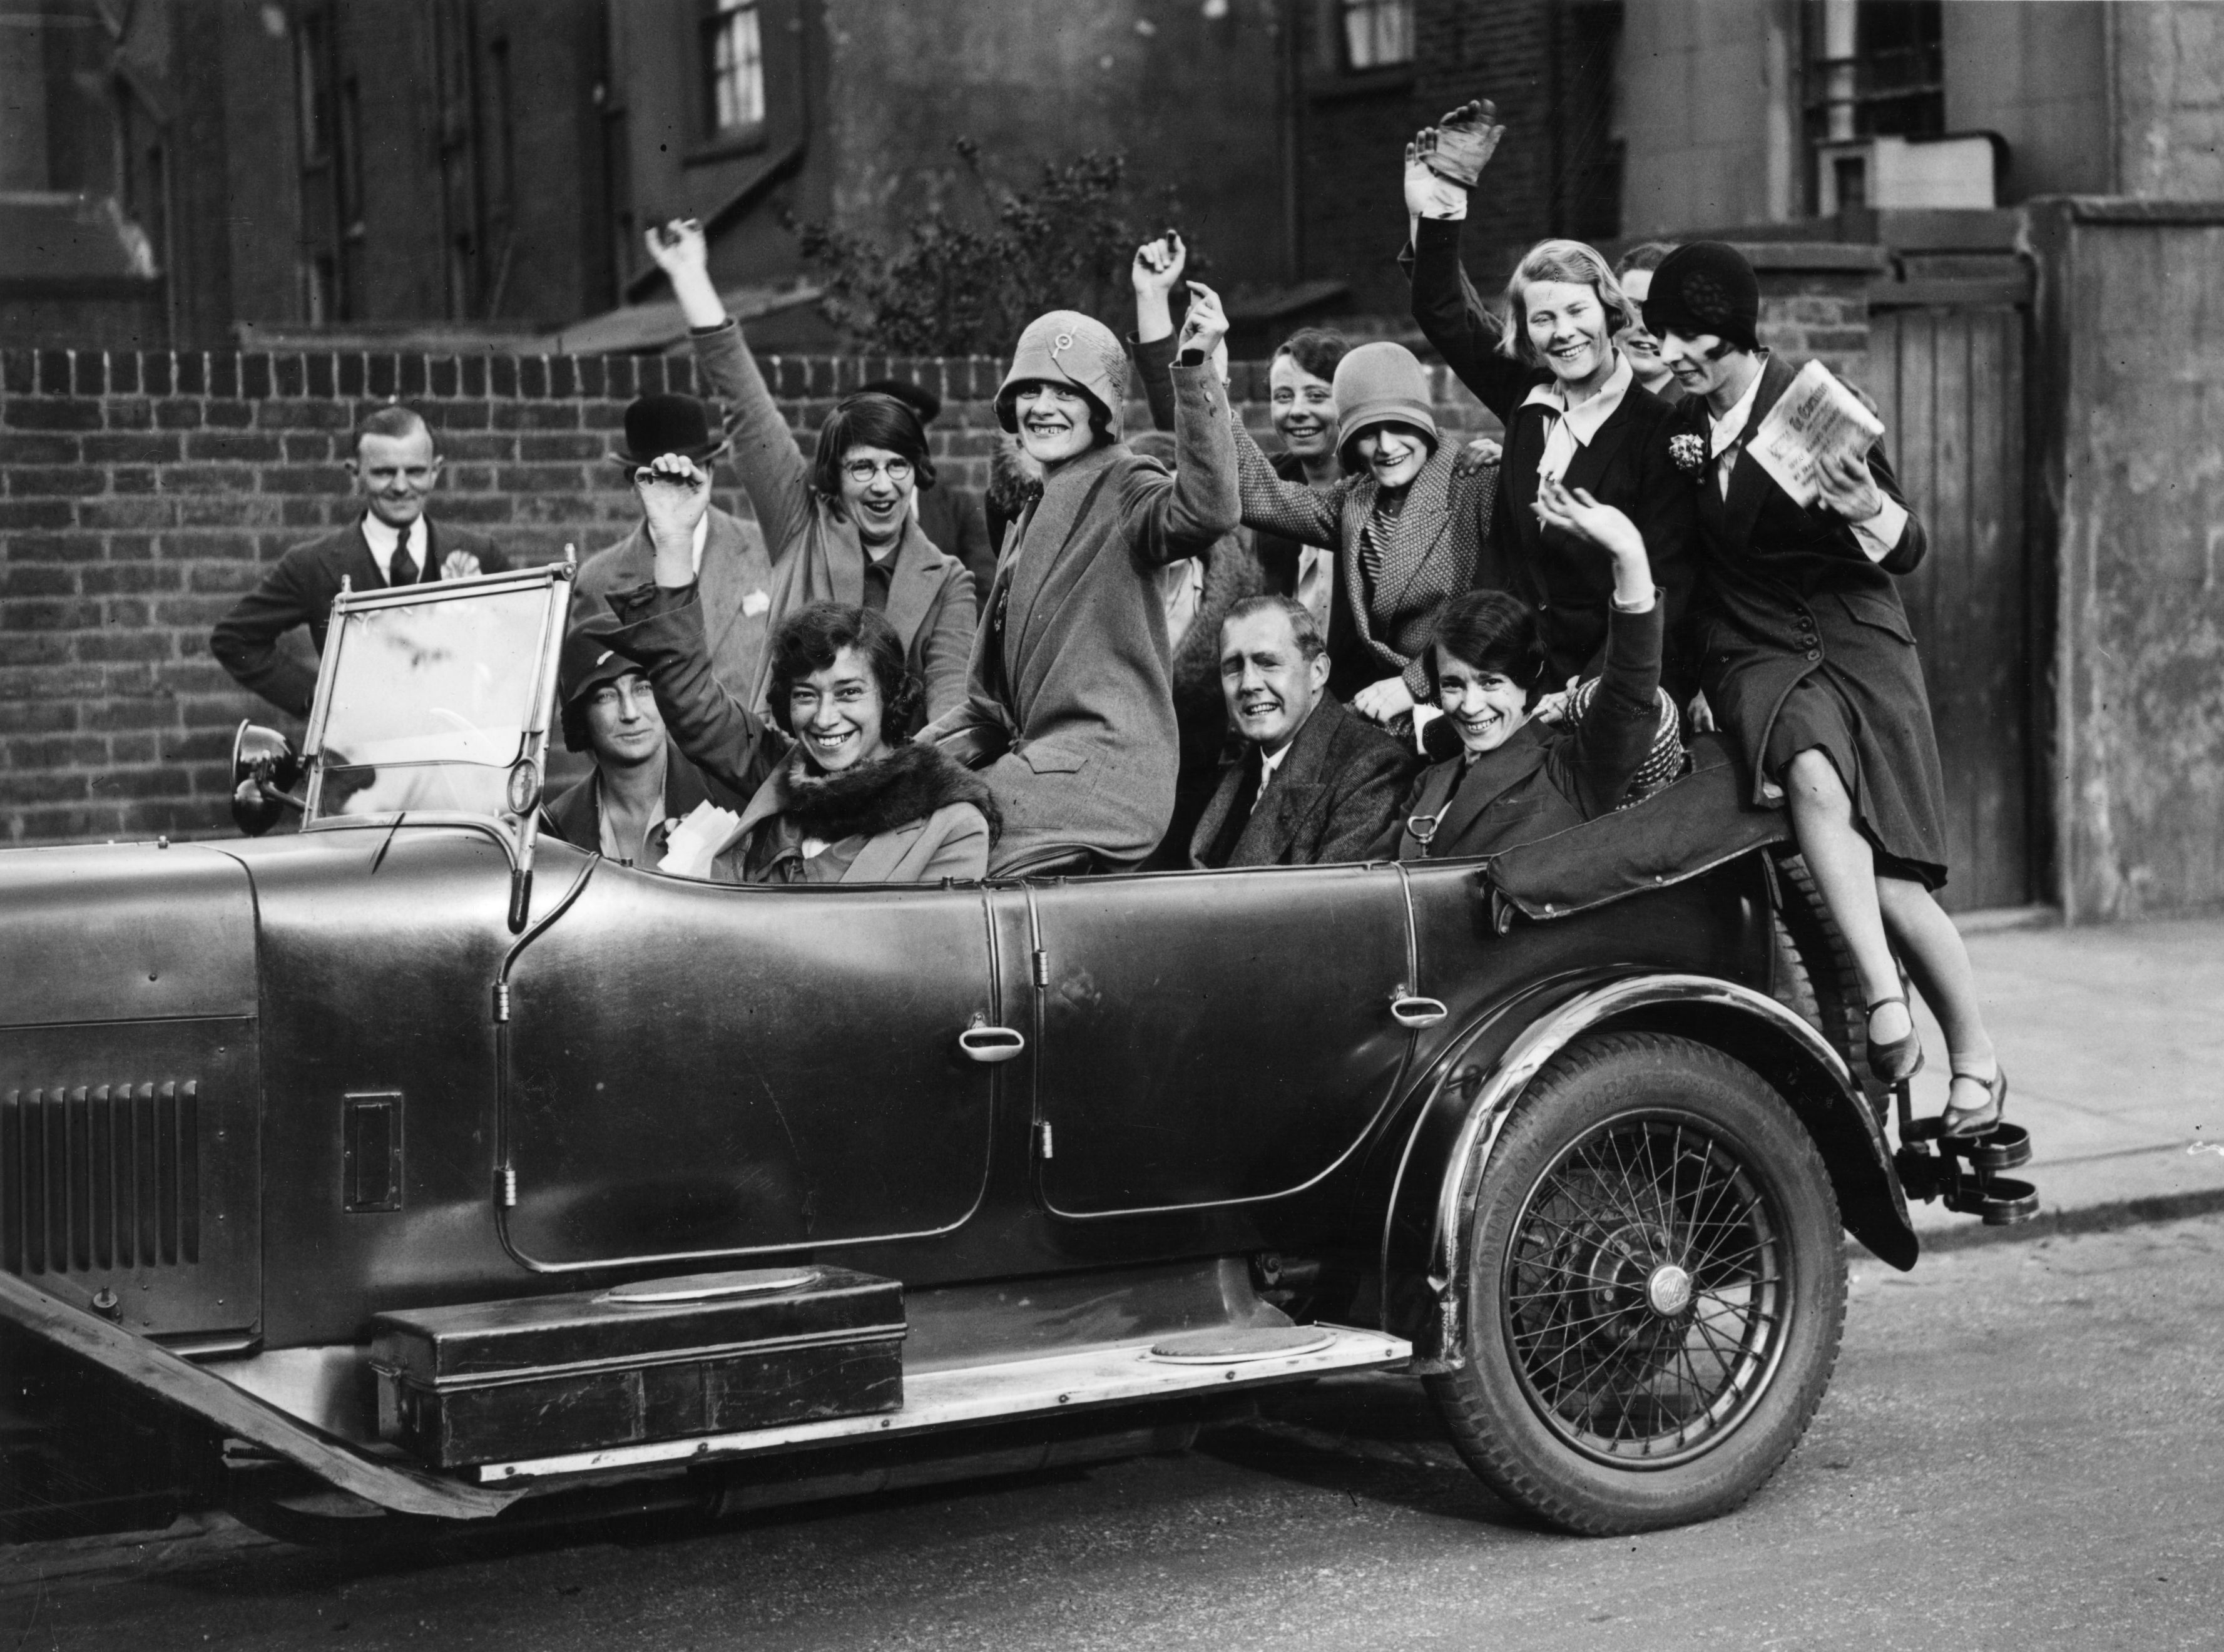 Are we headed for a Roaring '20s economy? - Marketplace